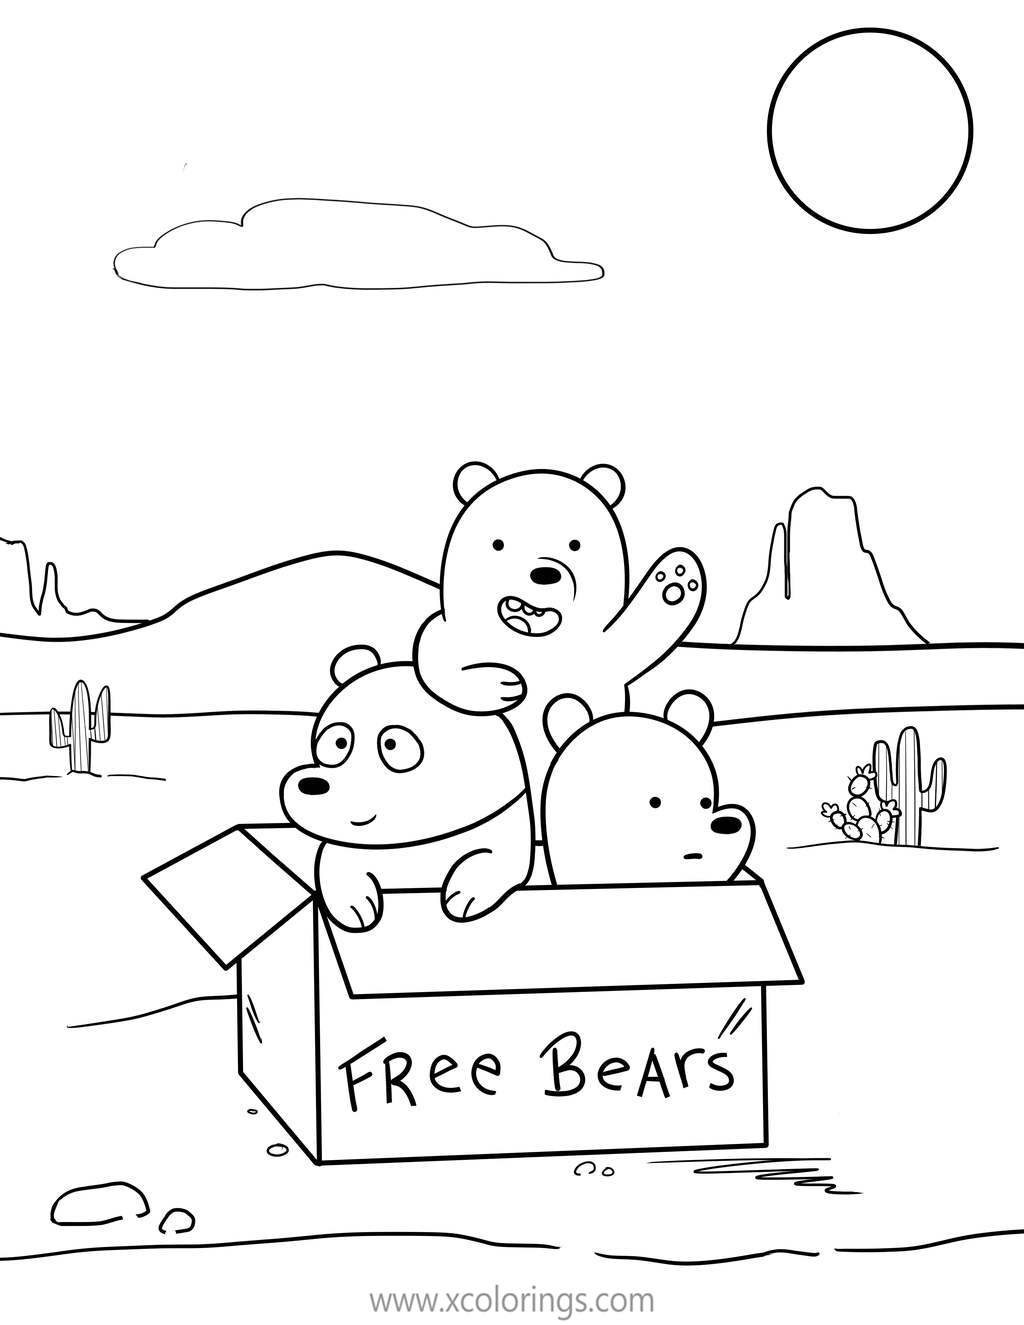 Free We Bare Bears Coloring Pages Baby Bears In a Box printable